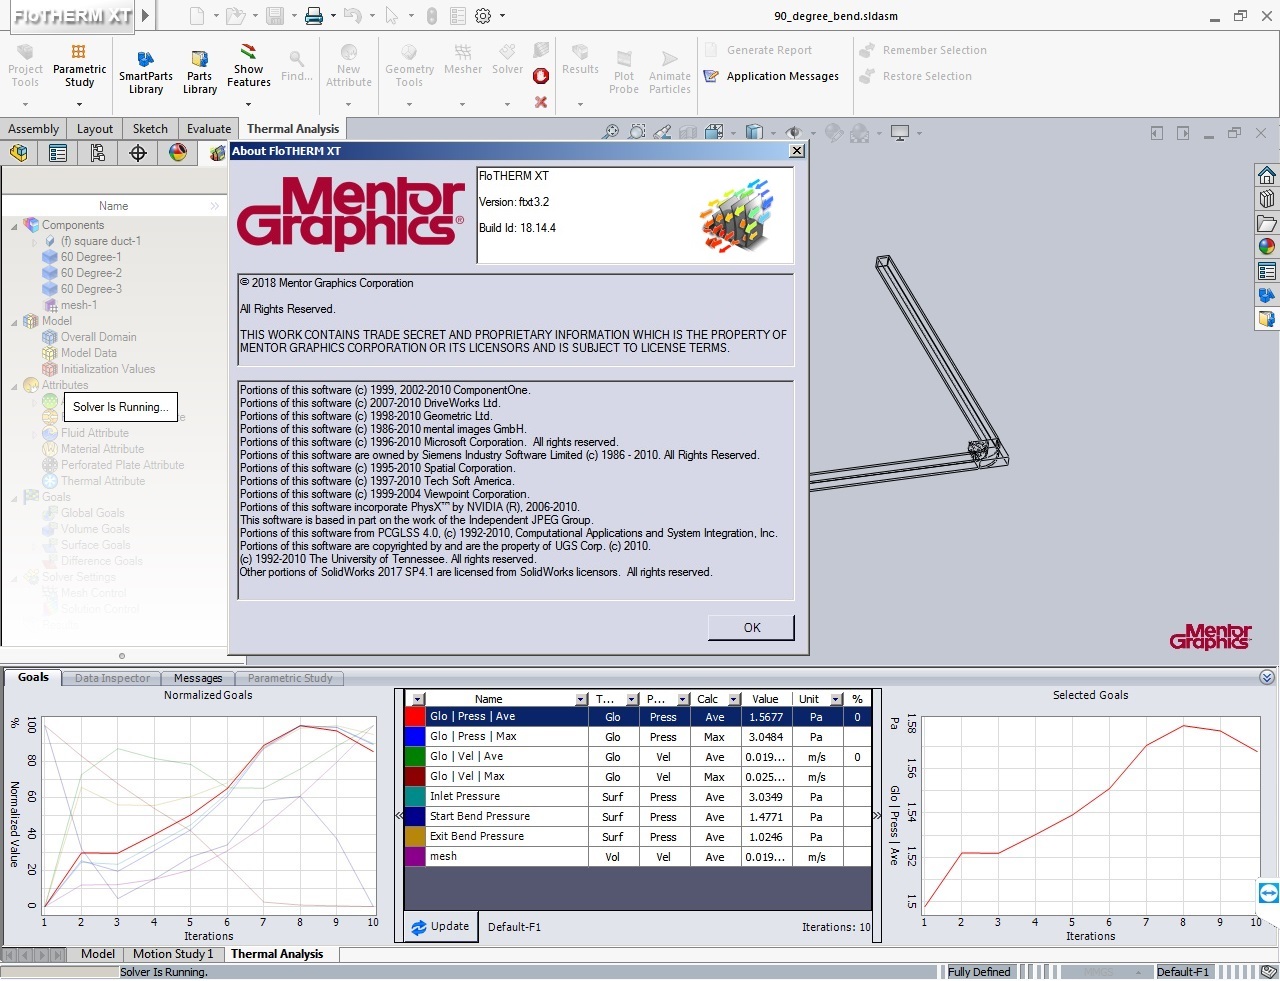 Working with Mentor Graphics FloTHERM XT v3.2 full license